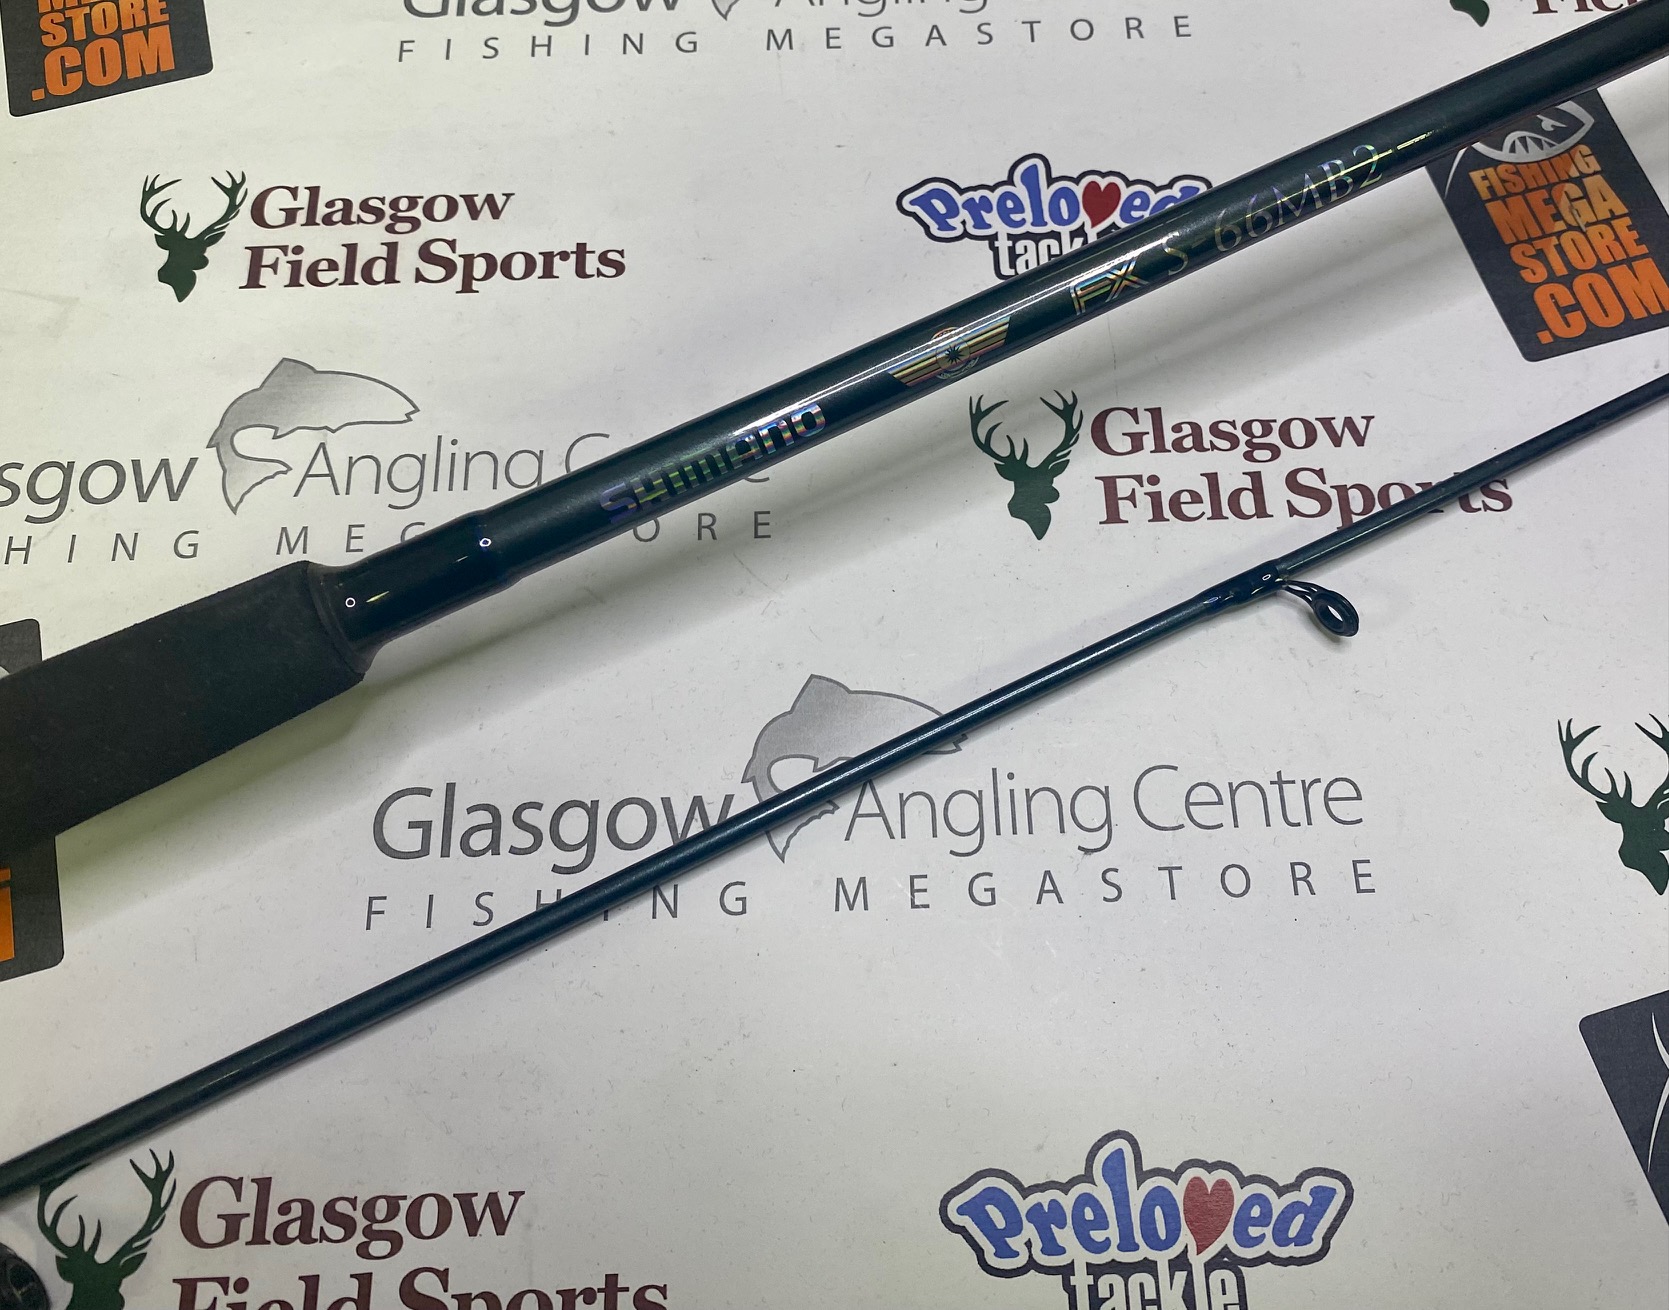 Preloved – Glasgow Angling Centre